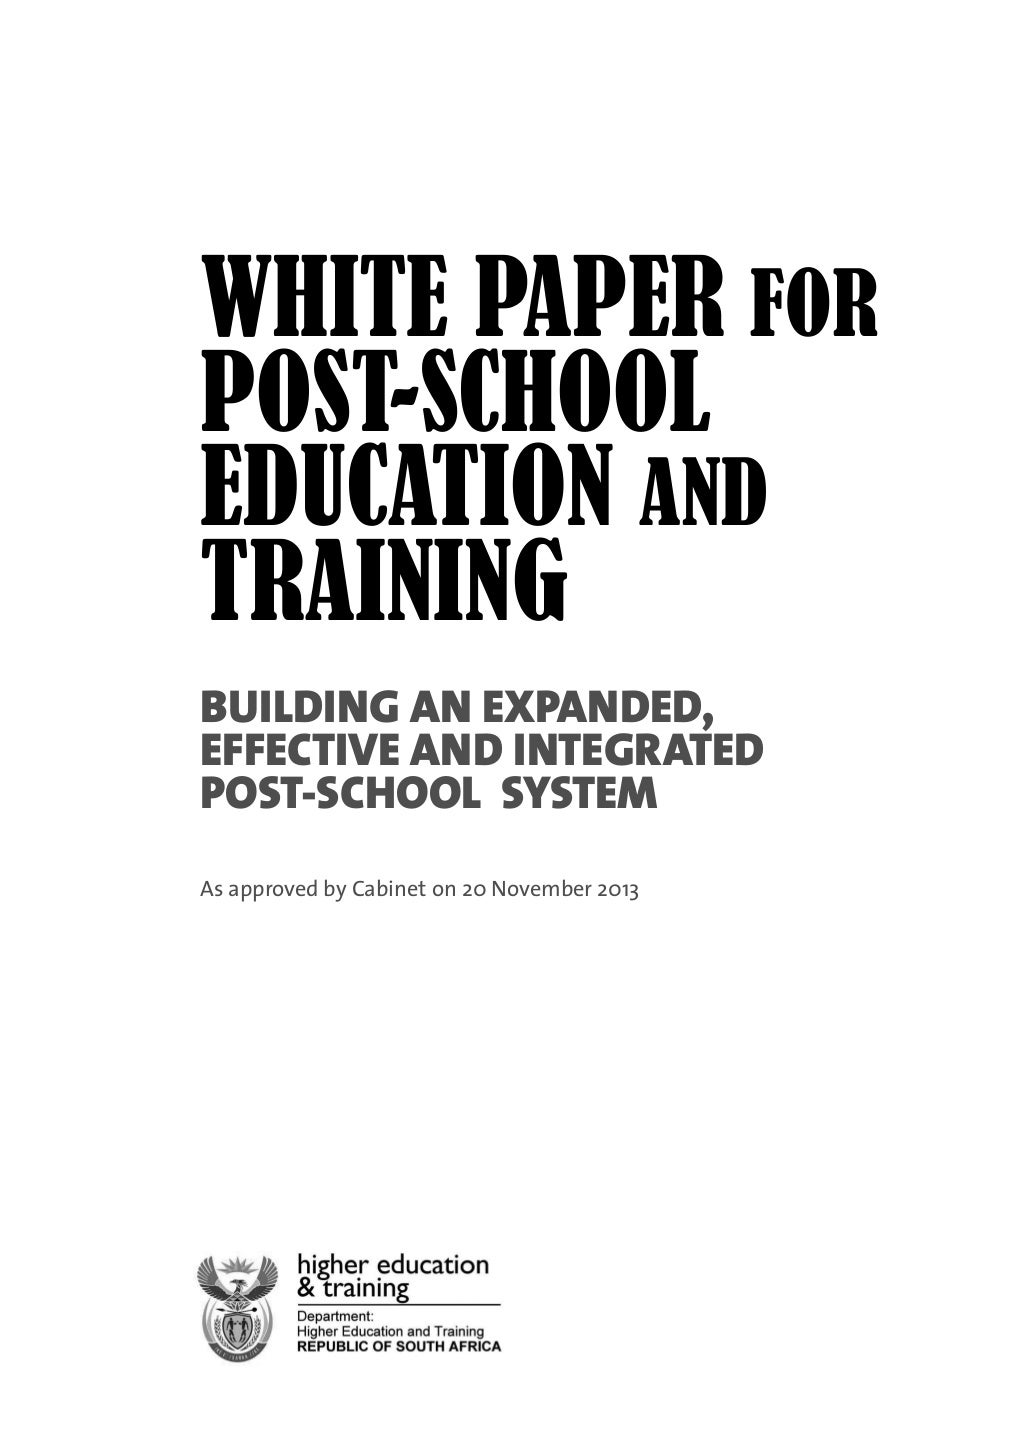 the white paper for post school education and training